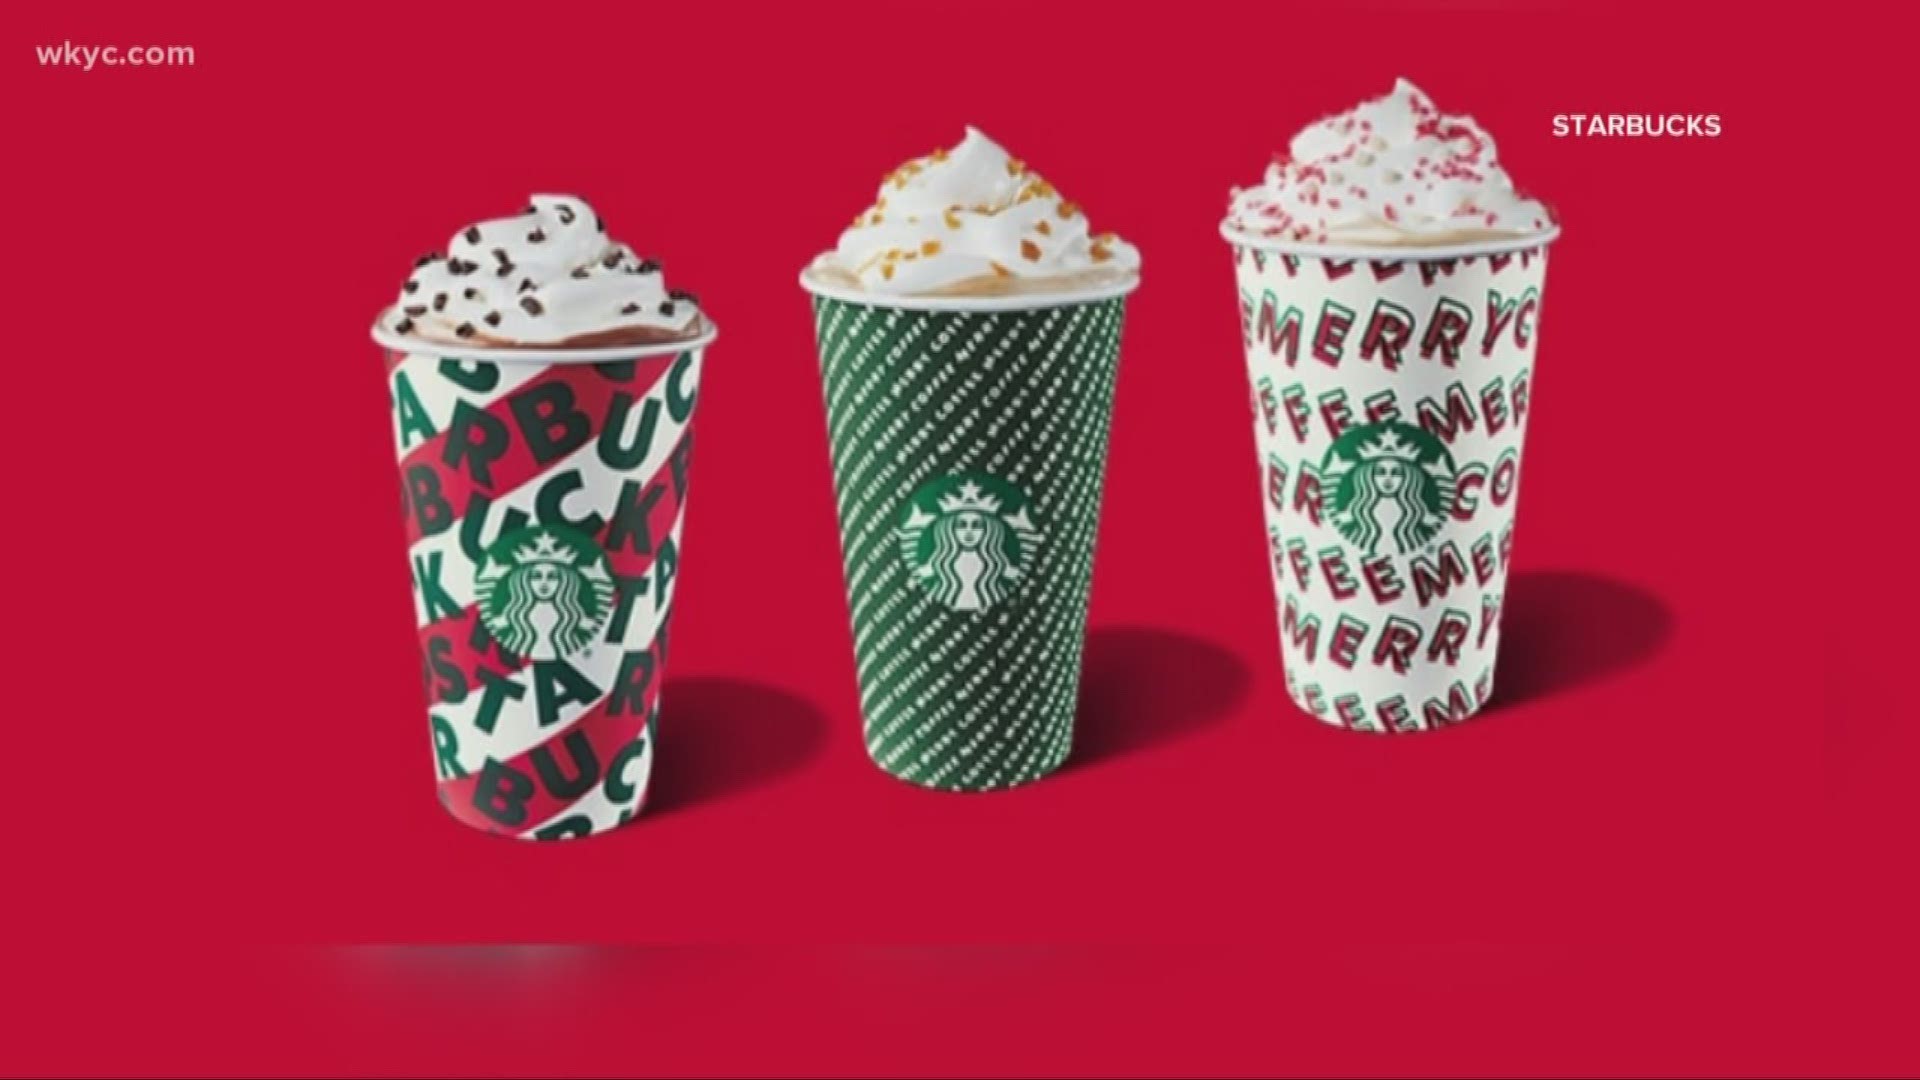 Nov. 7, 2019: They're here! Starbucks has released their 2019 holiday cups -- and Dave Chudowsky, who doesn't like coffee, gave their drinks a taste live on the air.